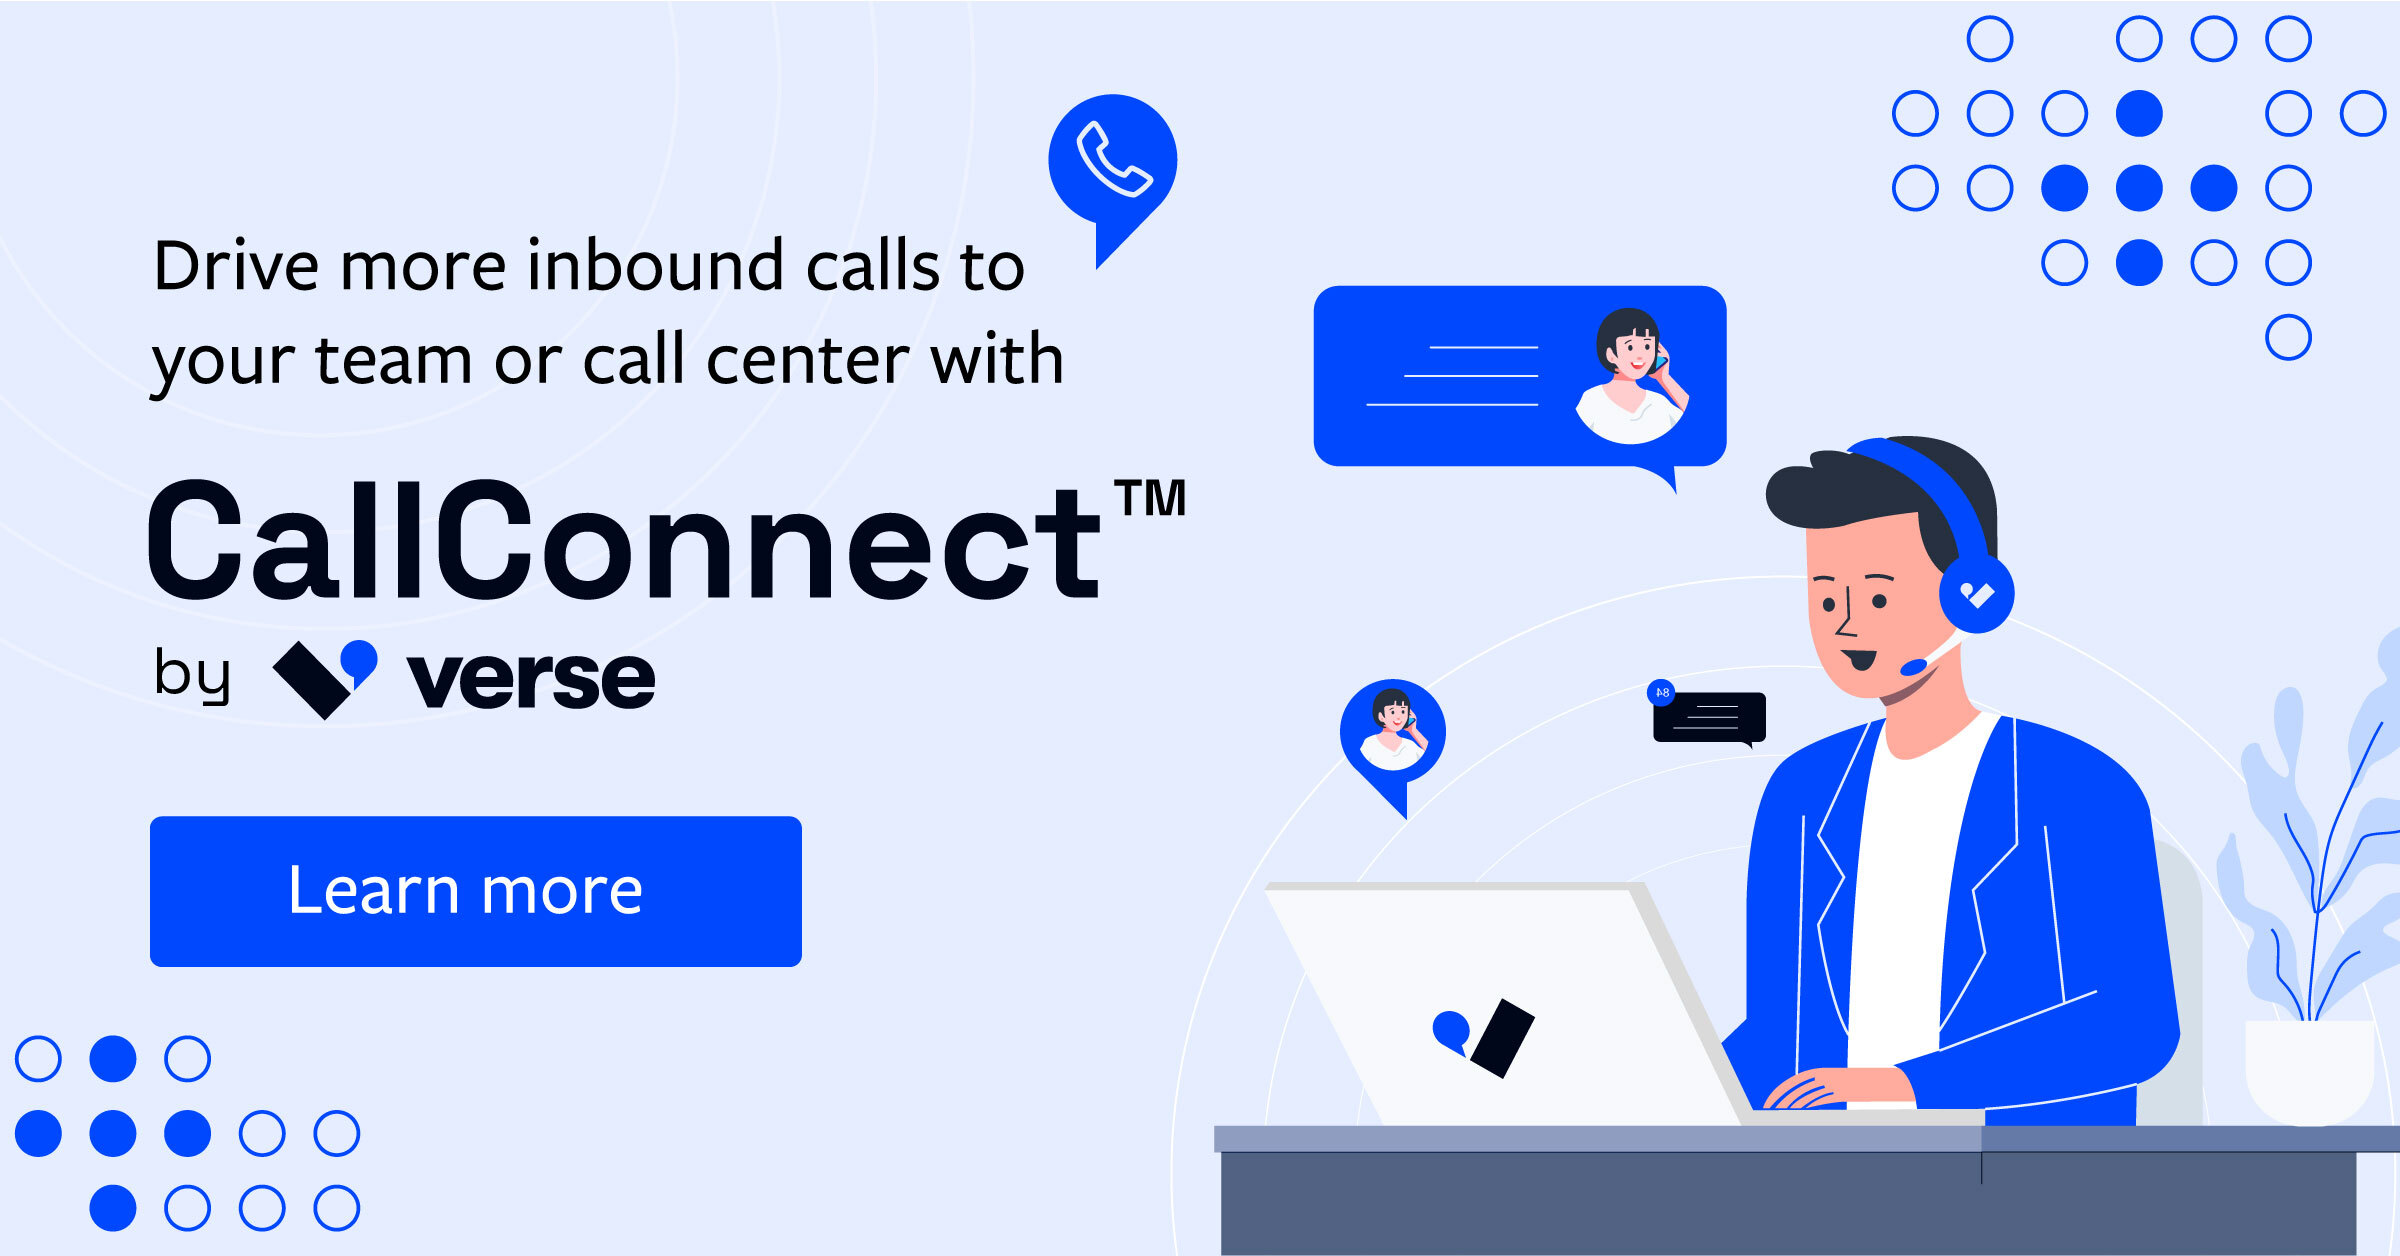 Press Release: Verse.io Announces Release of CallConnect™ to Modernize Call Centers With Conversational SMS Featured Image